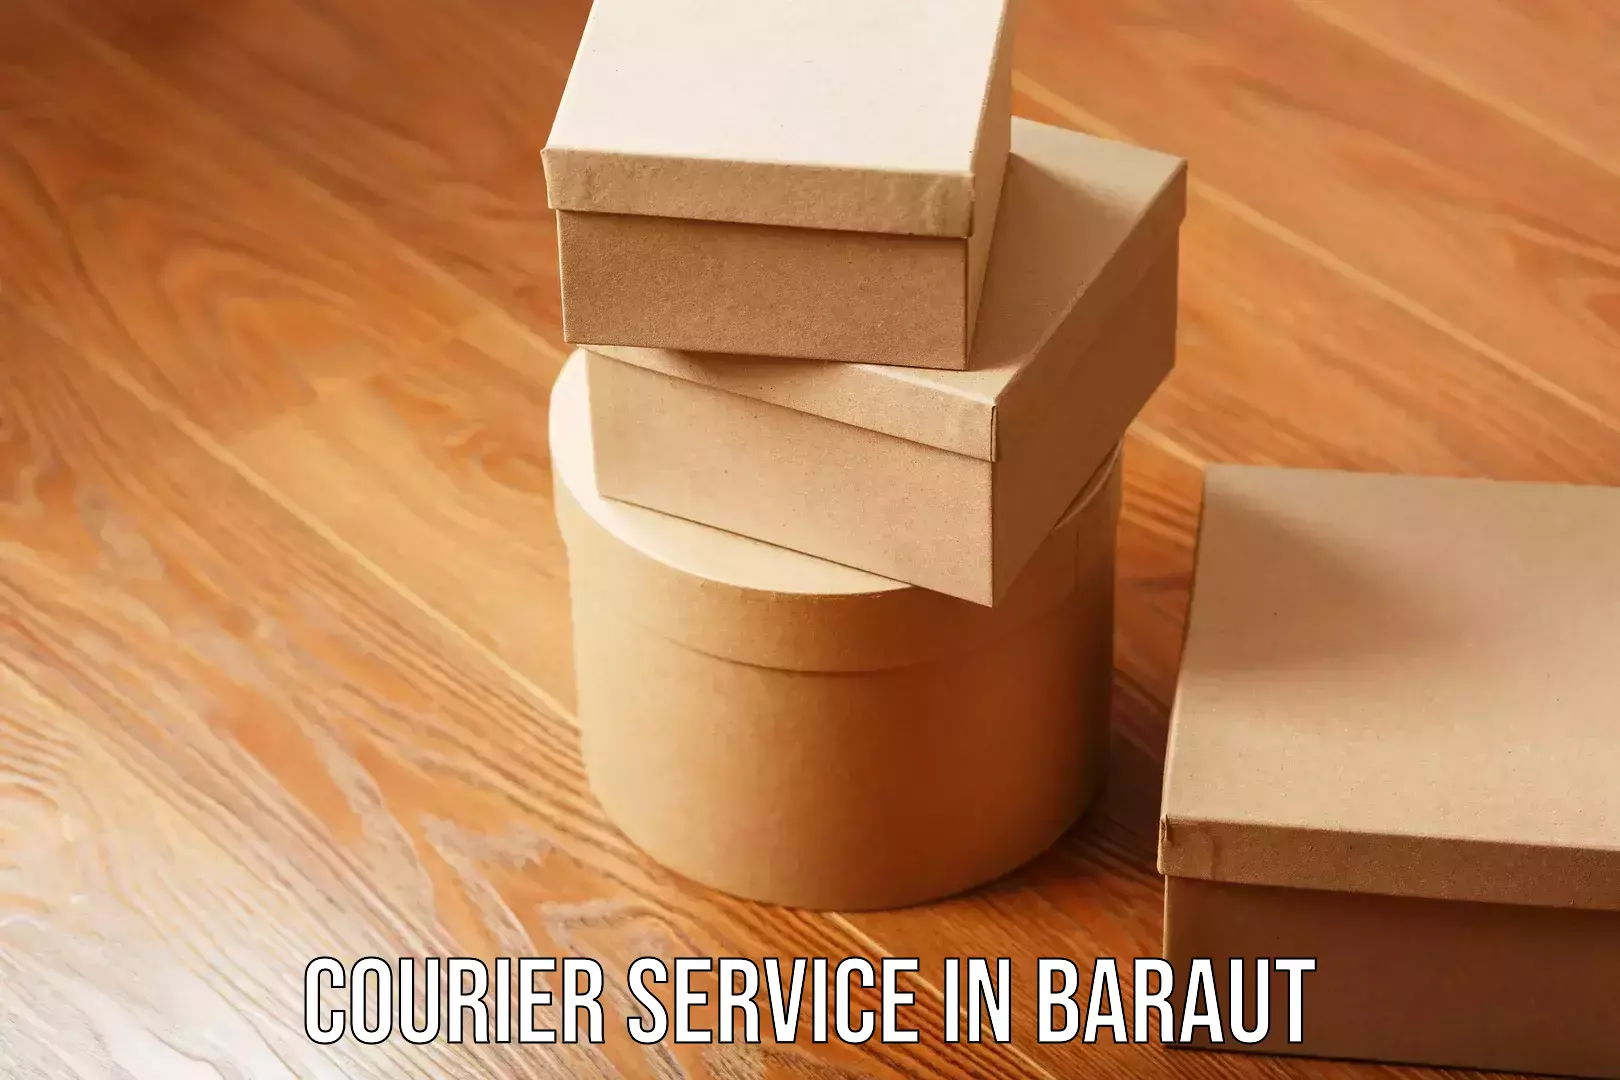 Express courier capabilities in Baraut